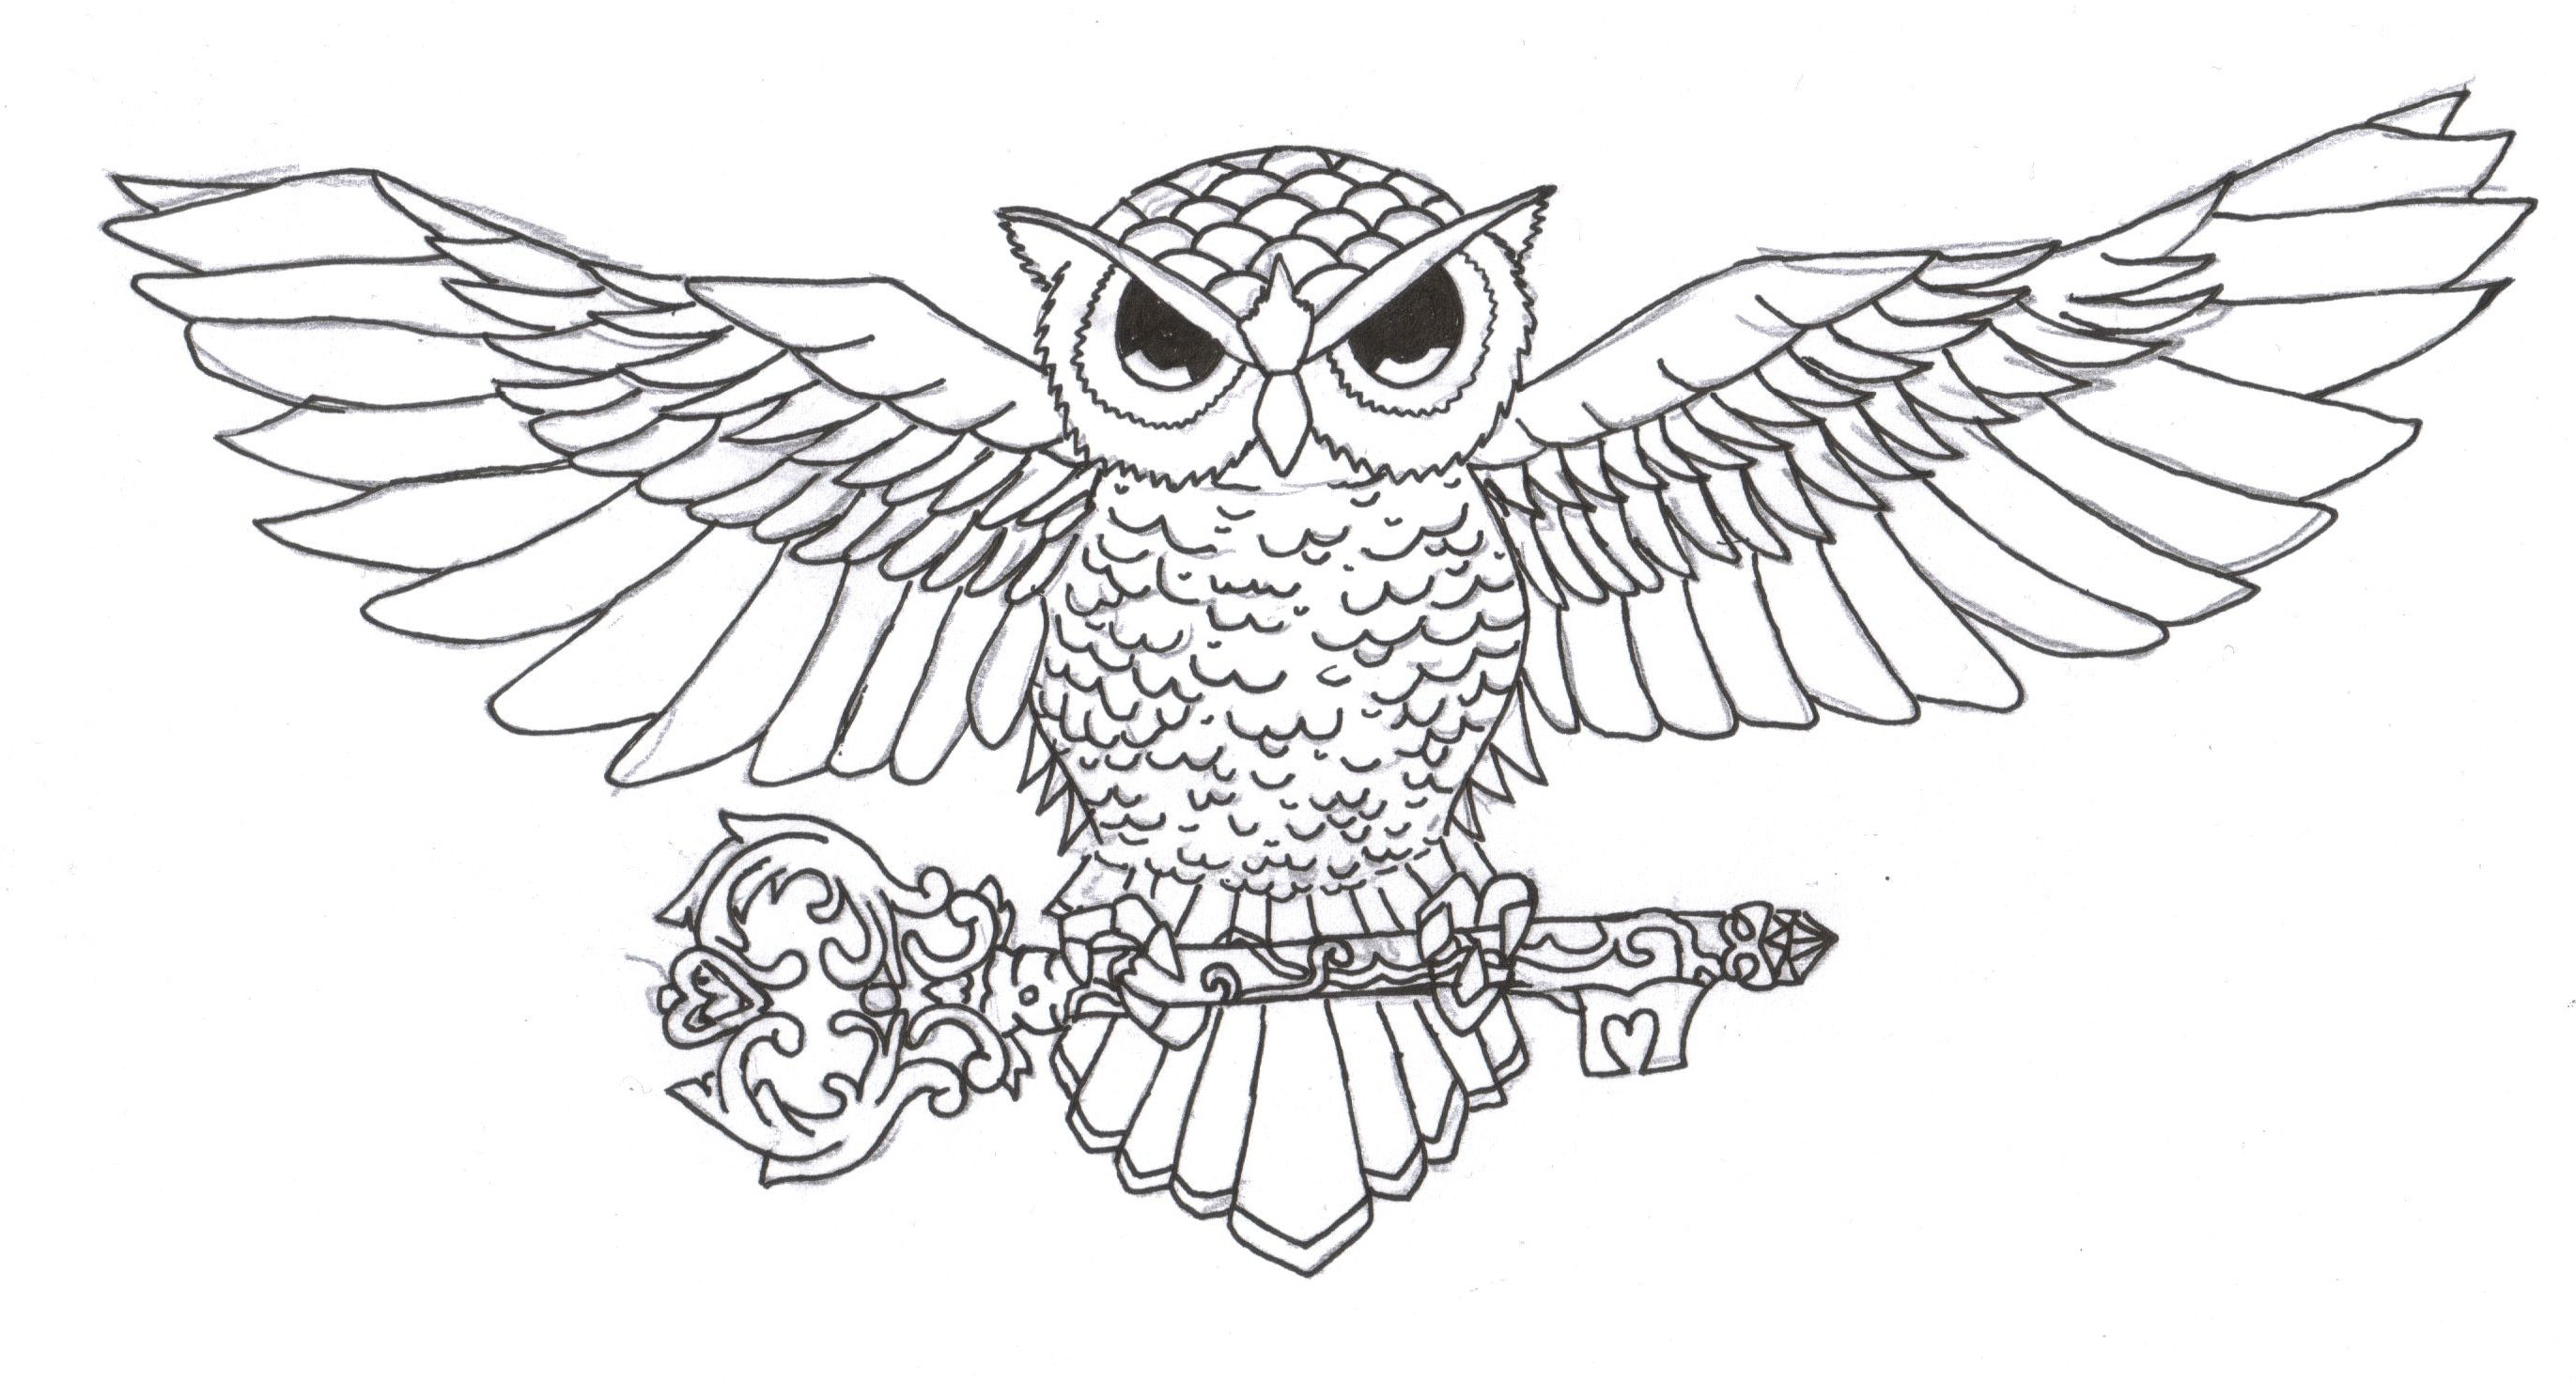 Owl Tattoo Design Owl Chest Tattoo Designs Drawings Pearls with dimensions 2742 X 1472